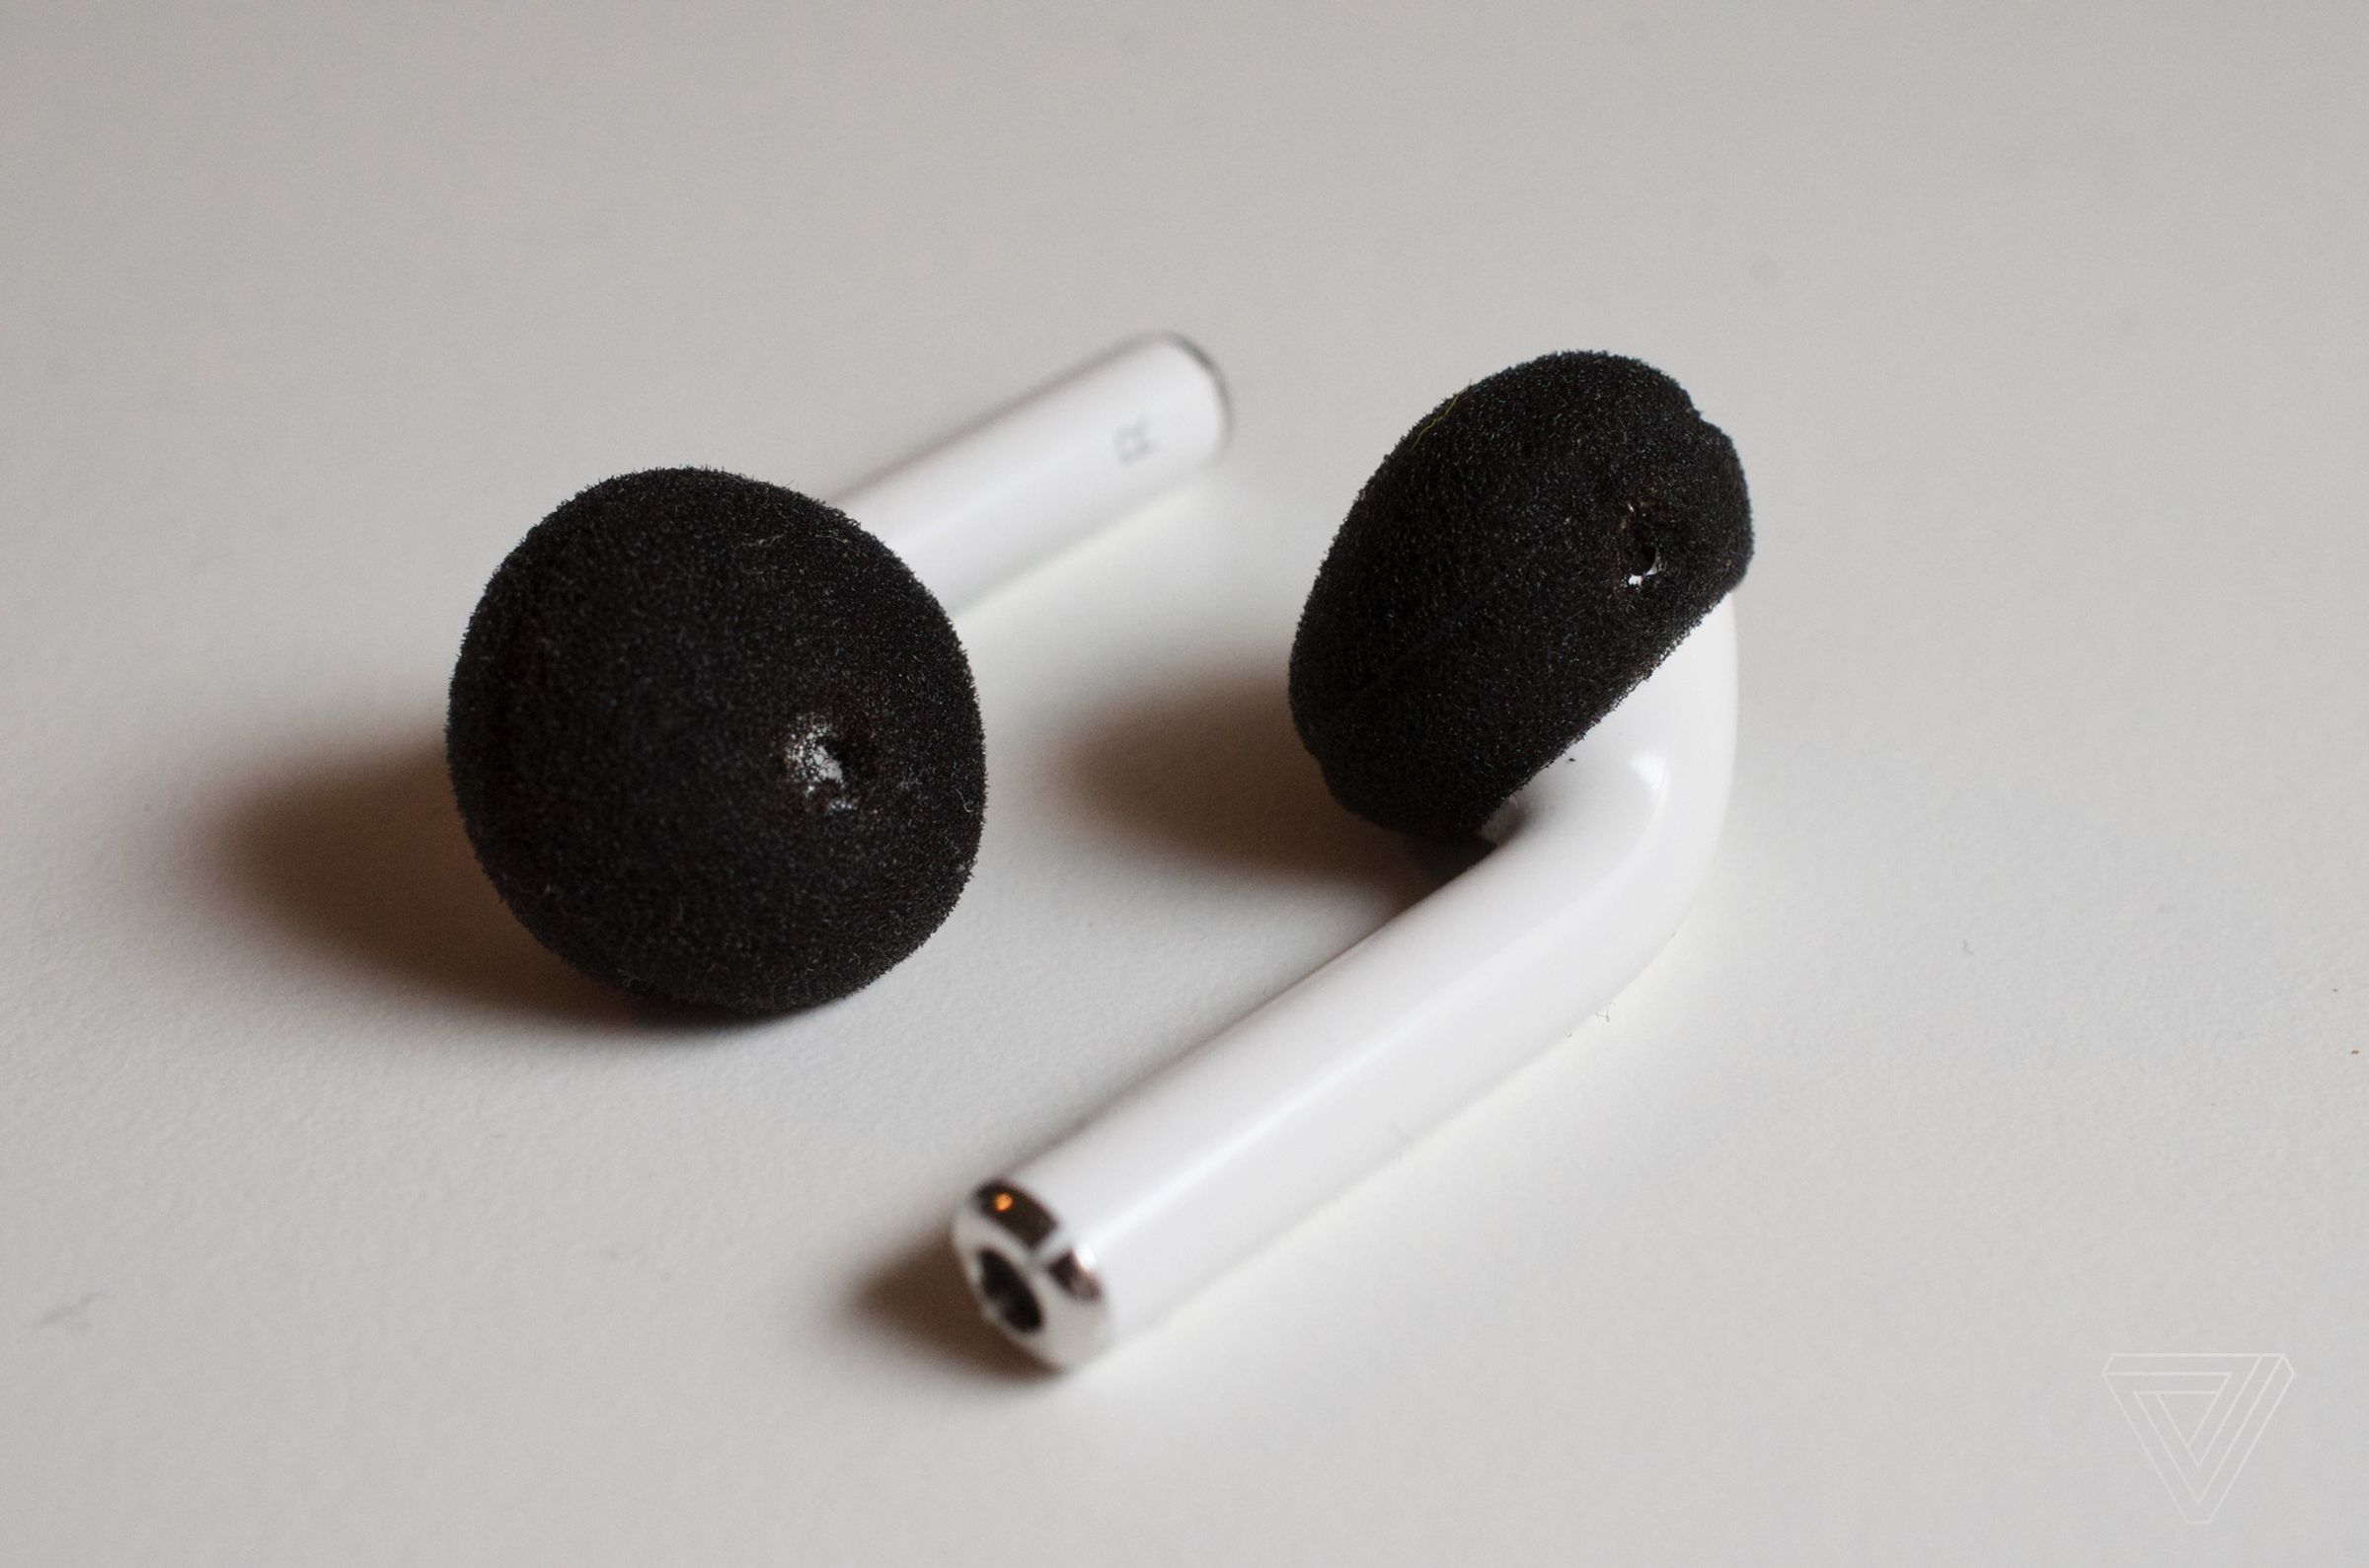 The AirPods after foam cover hack.